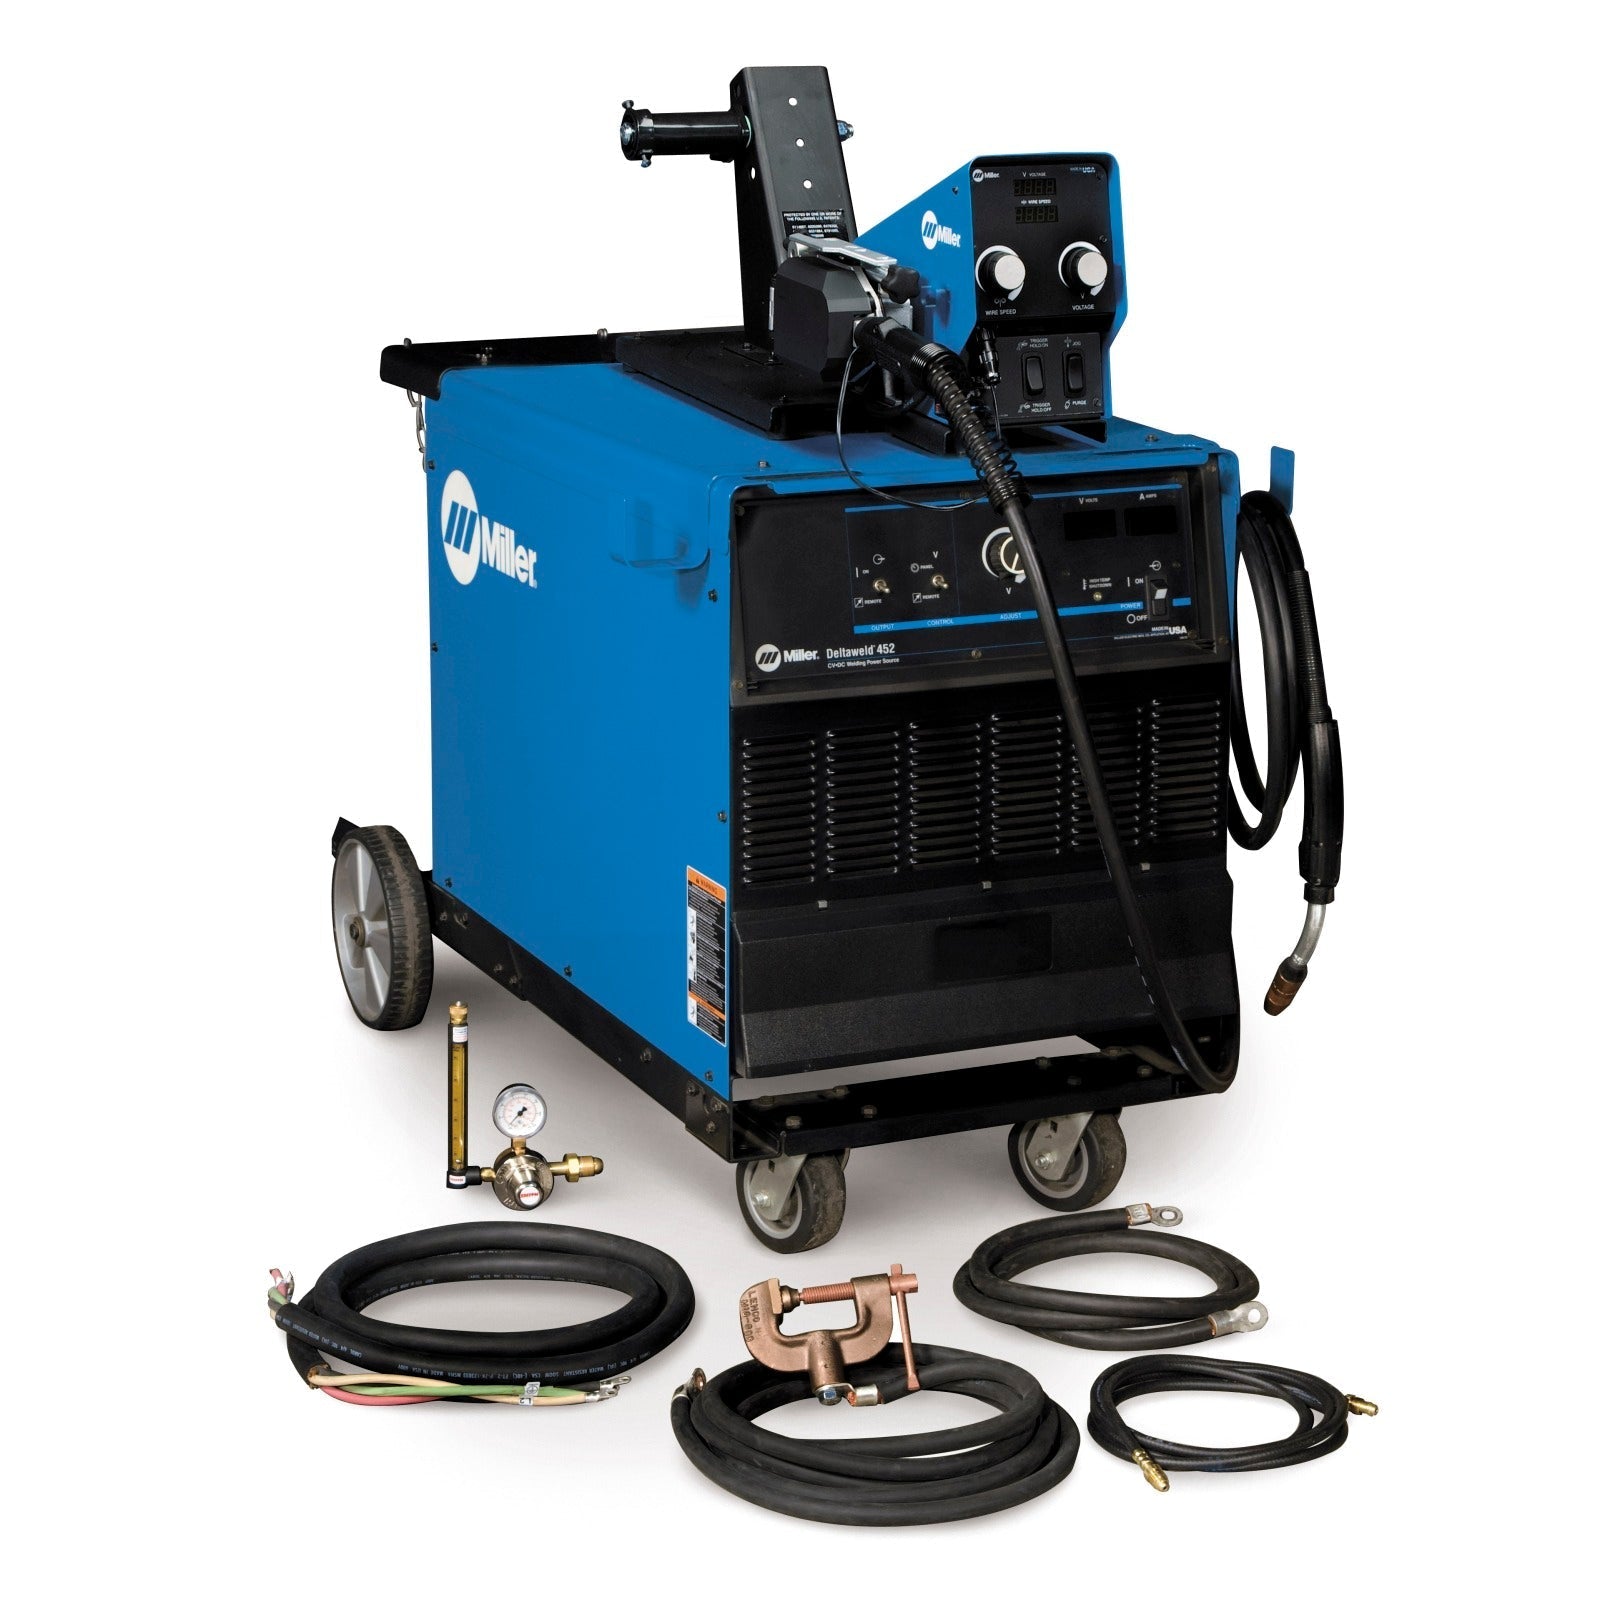 Miller Deltaweld 452 MIG Welder with Feeder, Accessory Package and Cart (951236)